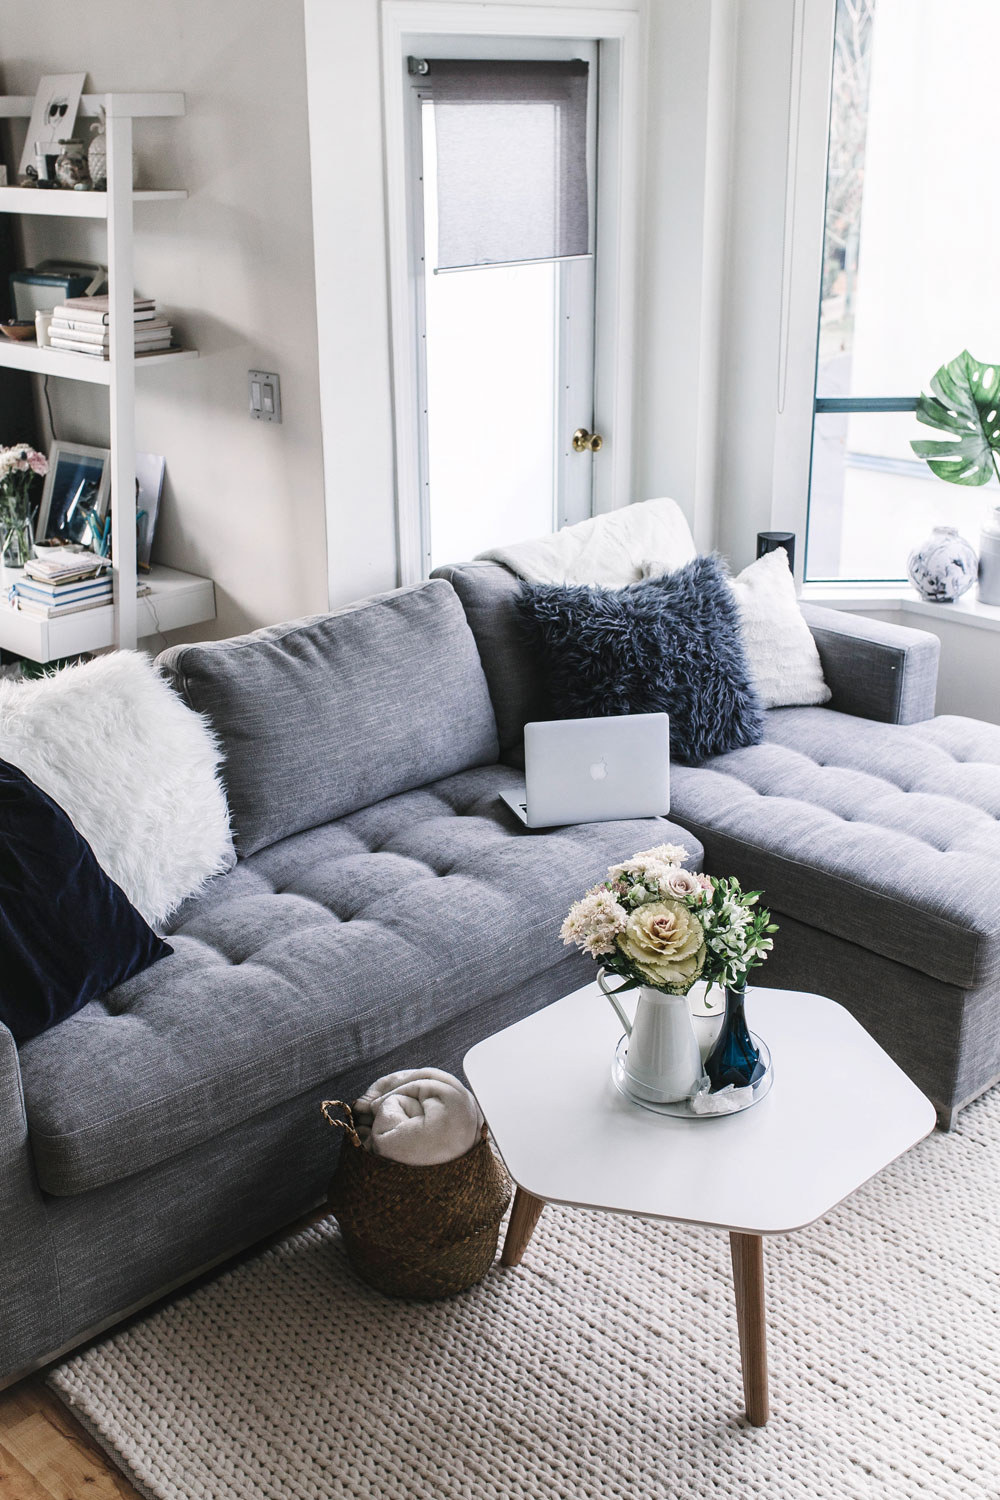 Article Soma Sectional Couch